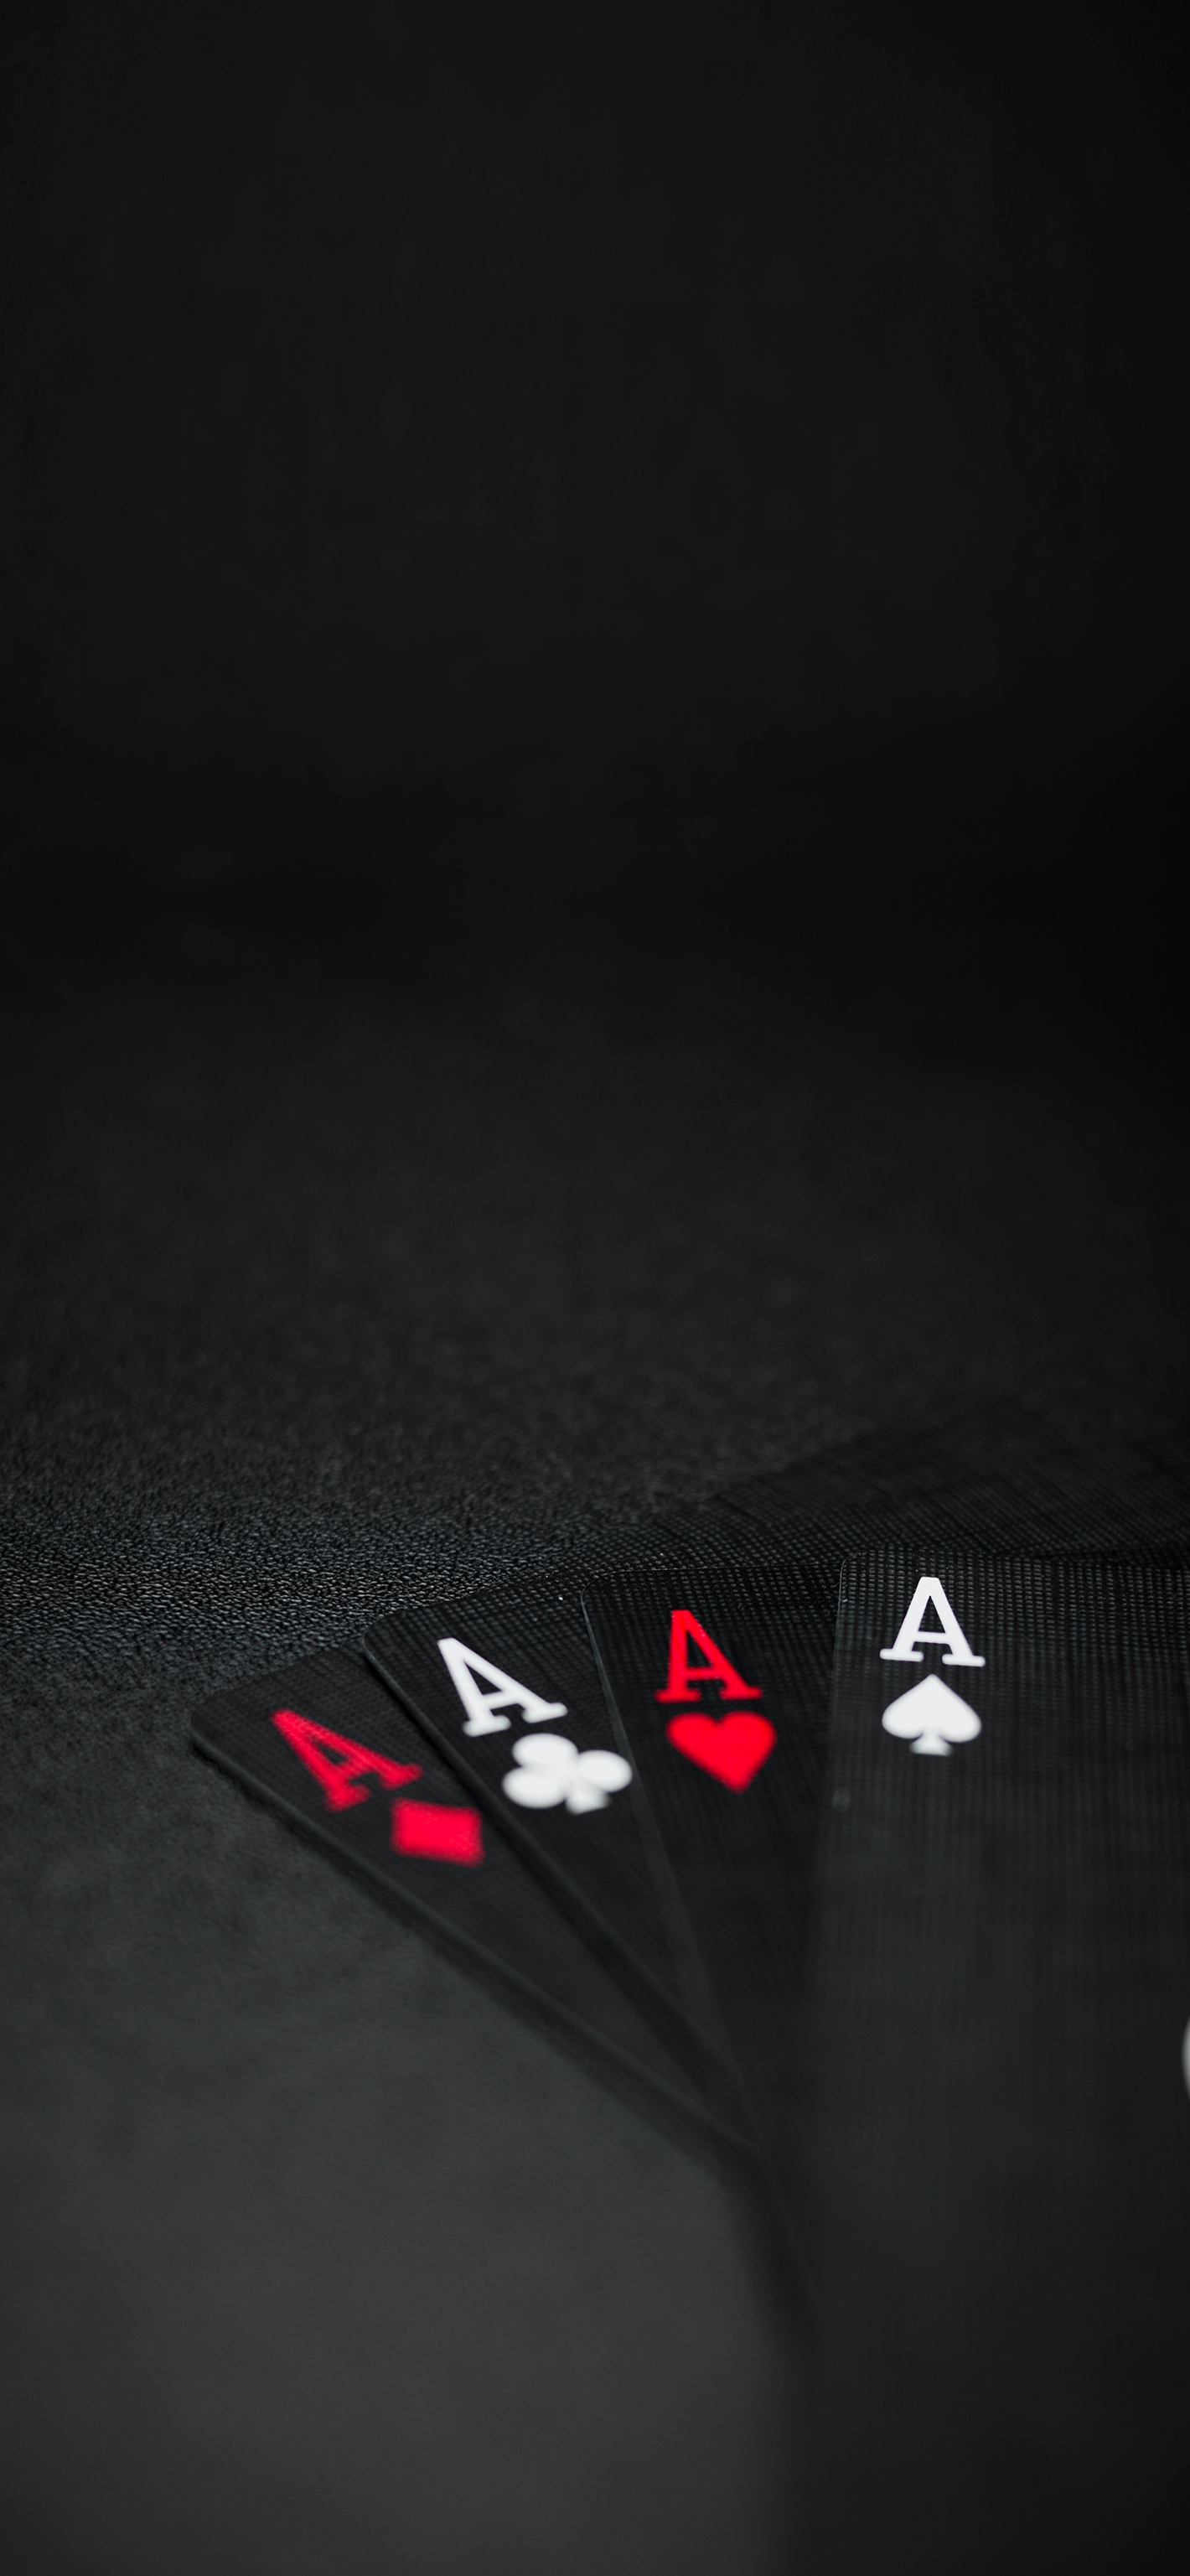 Poker of Aces